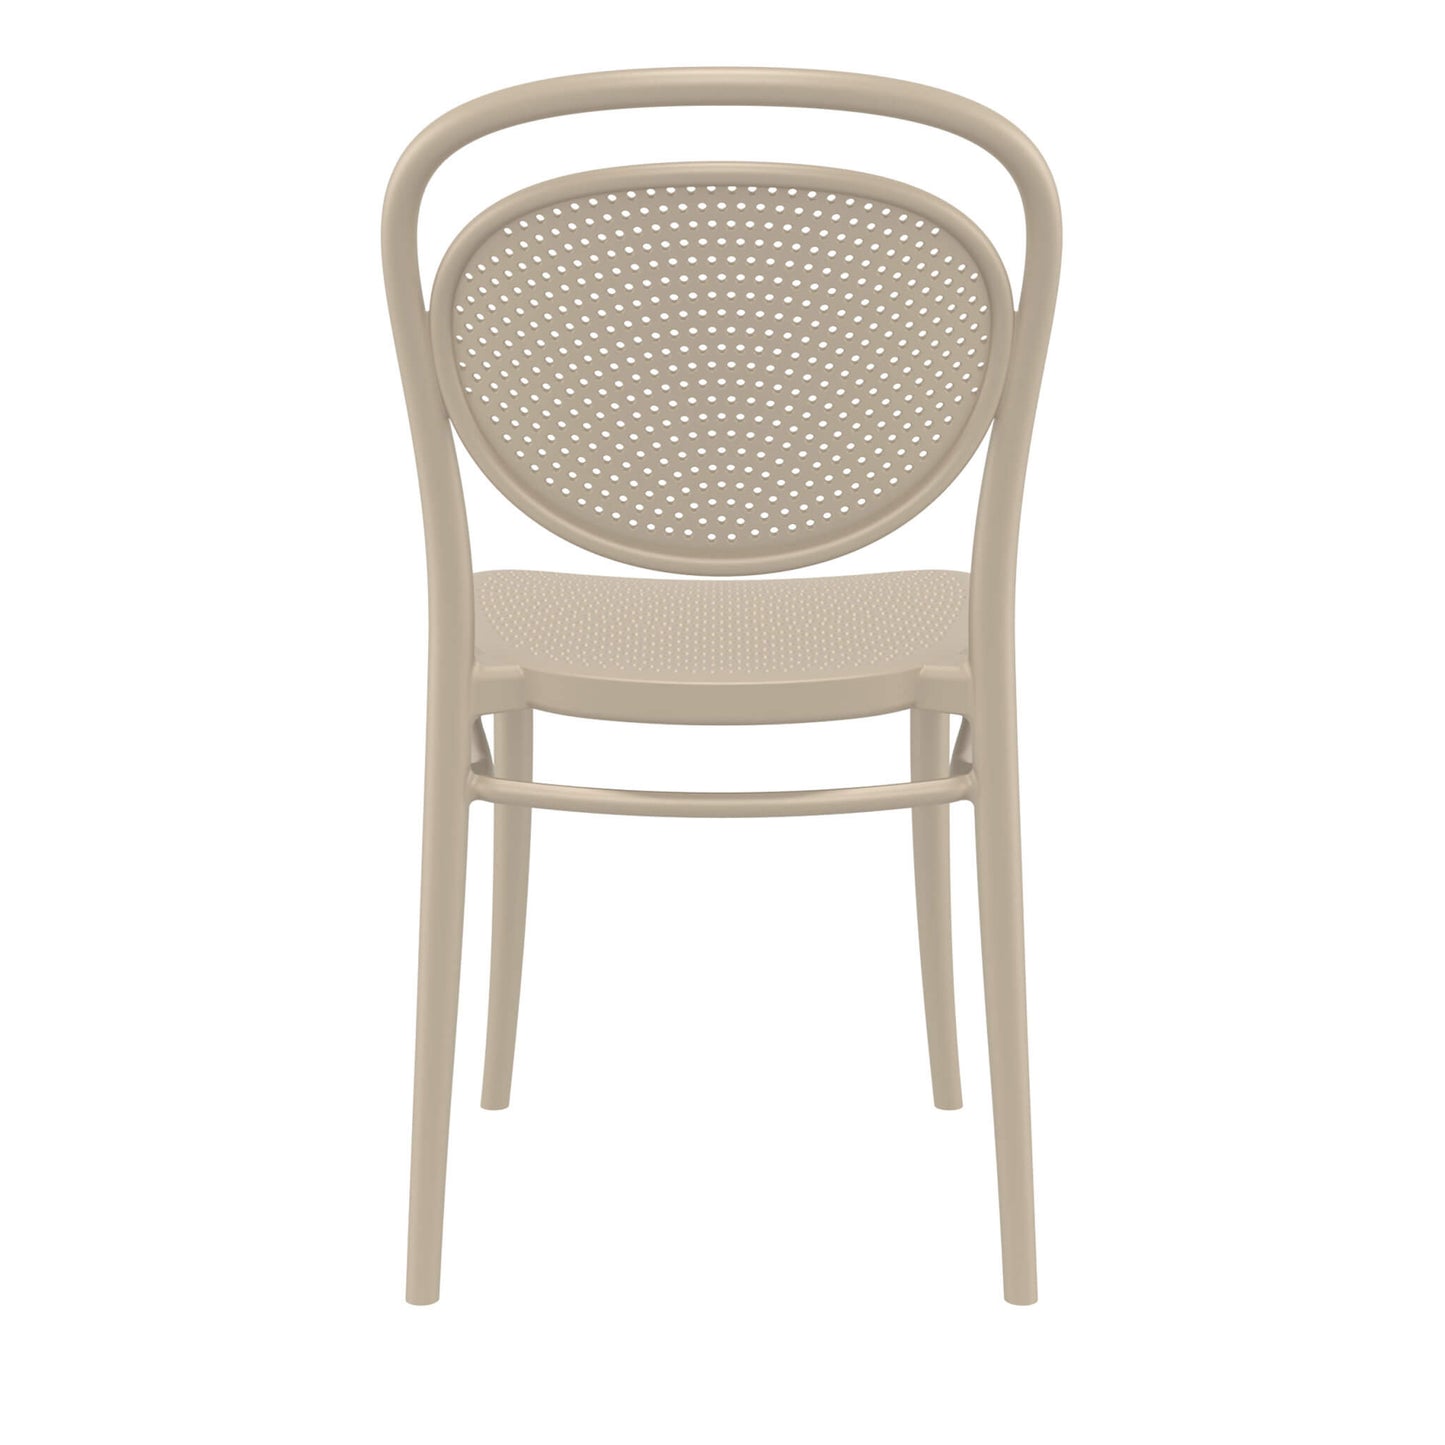 Regan | Plastic Stackable Outdoor Dining Chairs | Set Of 2 | Taupe